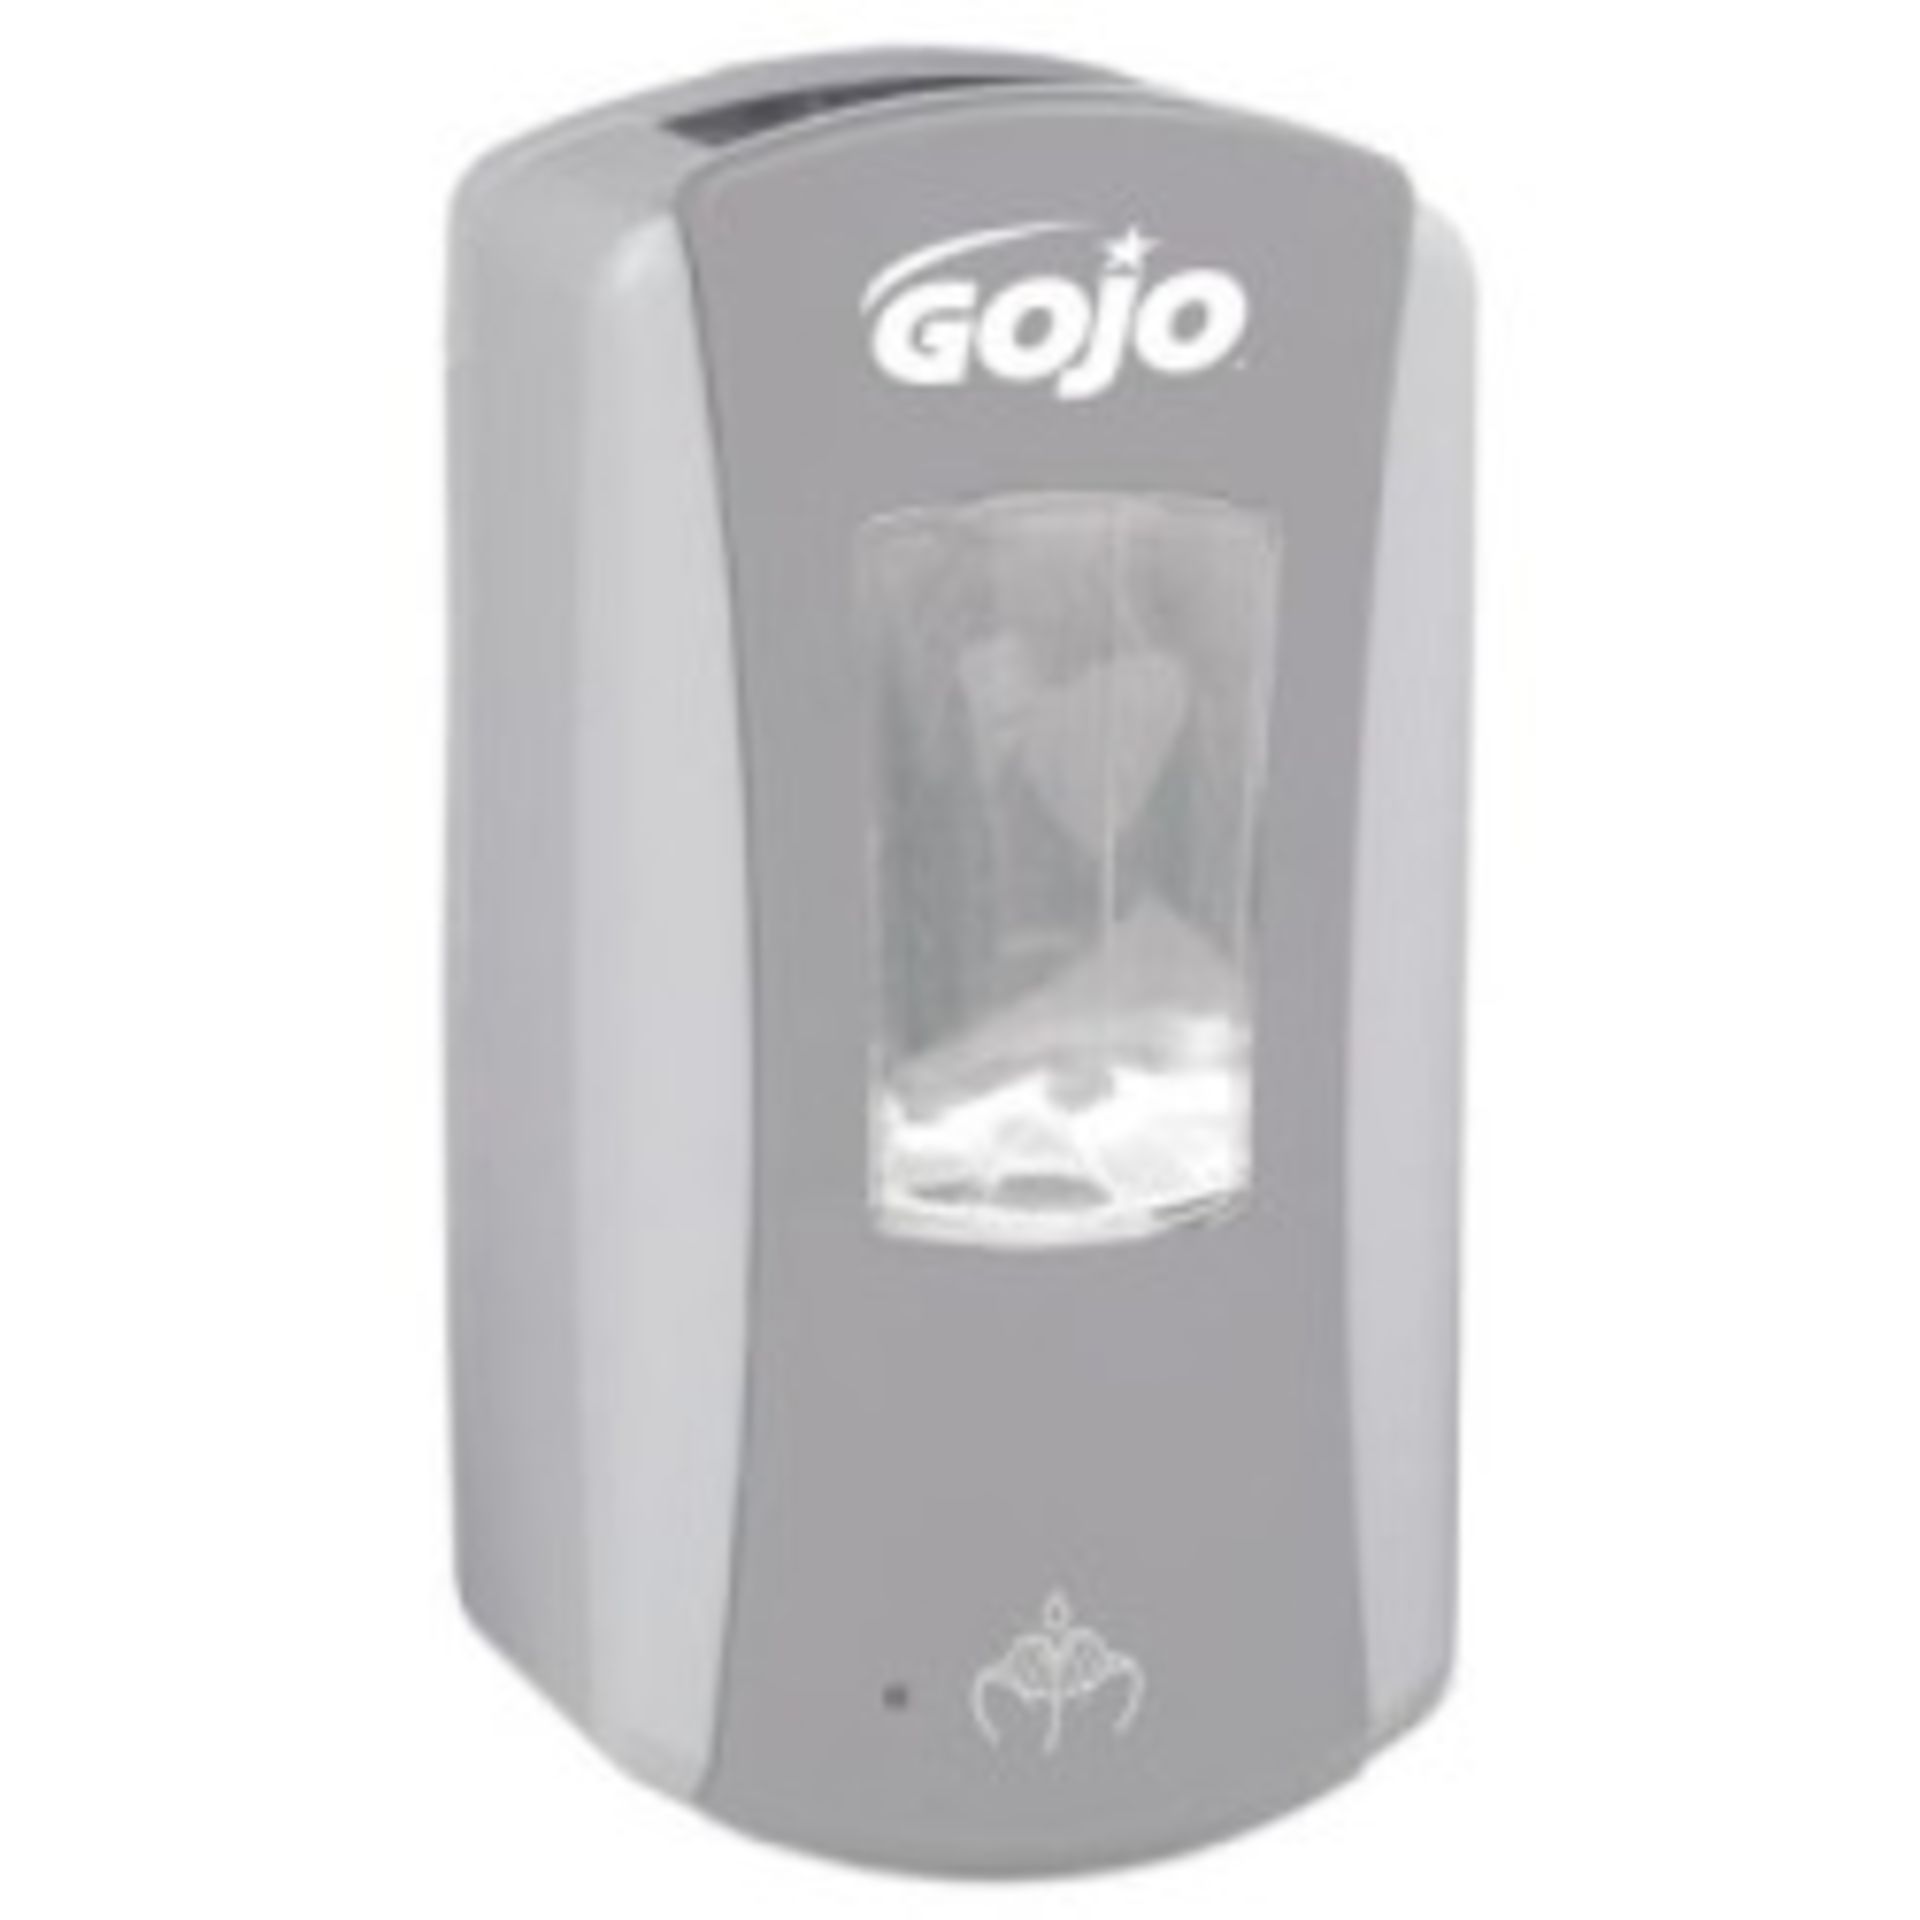 V *TRADE QTY* Brand New A Lot Of Four 1200ml Gojo Grey/White Hands Free Soap Dispensers ISP £19.99